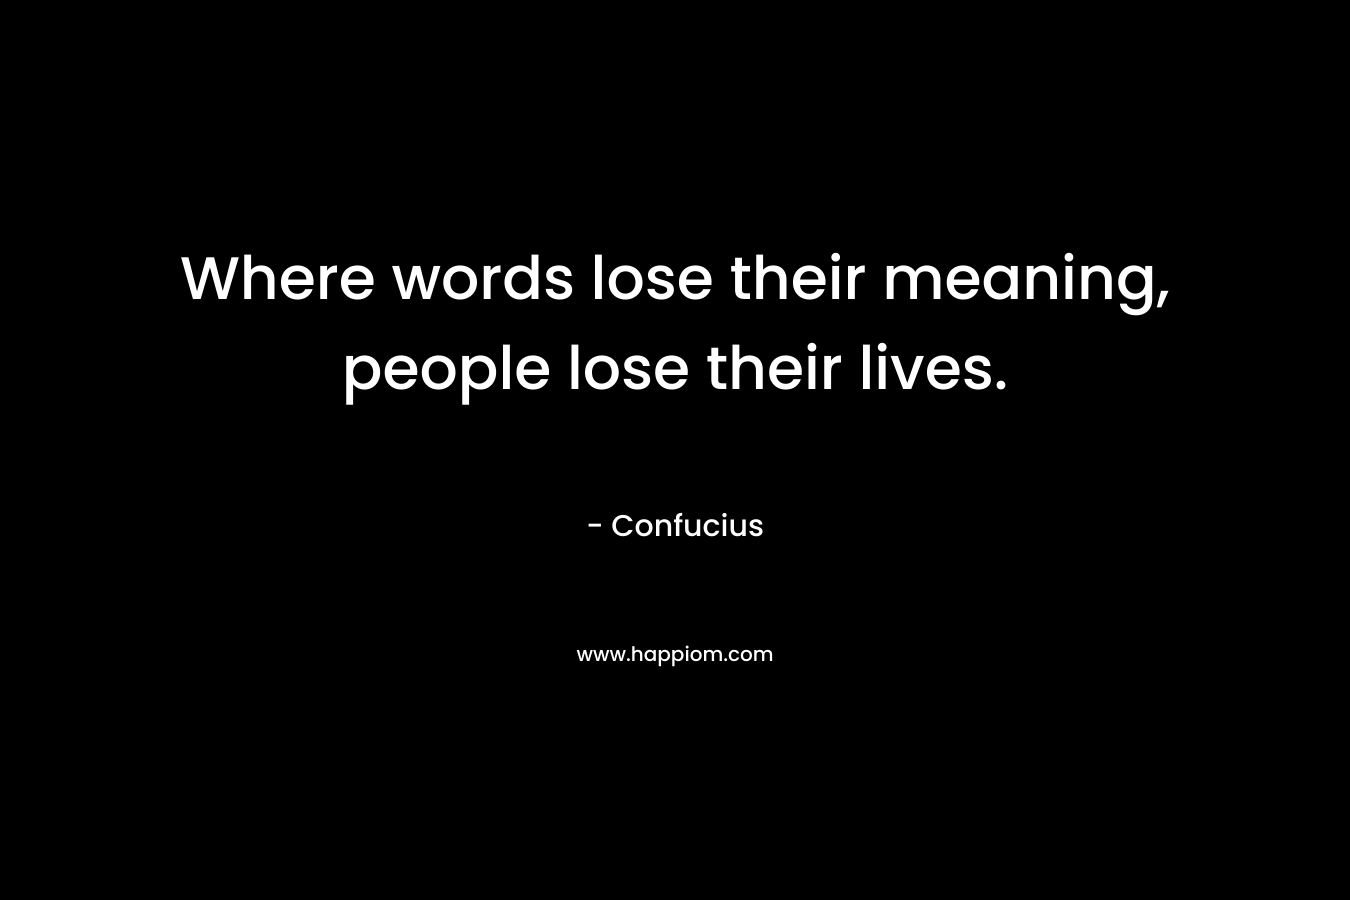 Where words lose their meaning, people lose their lives.